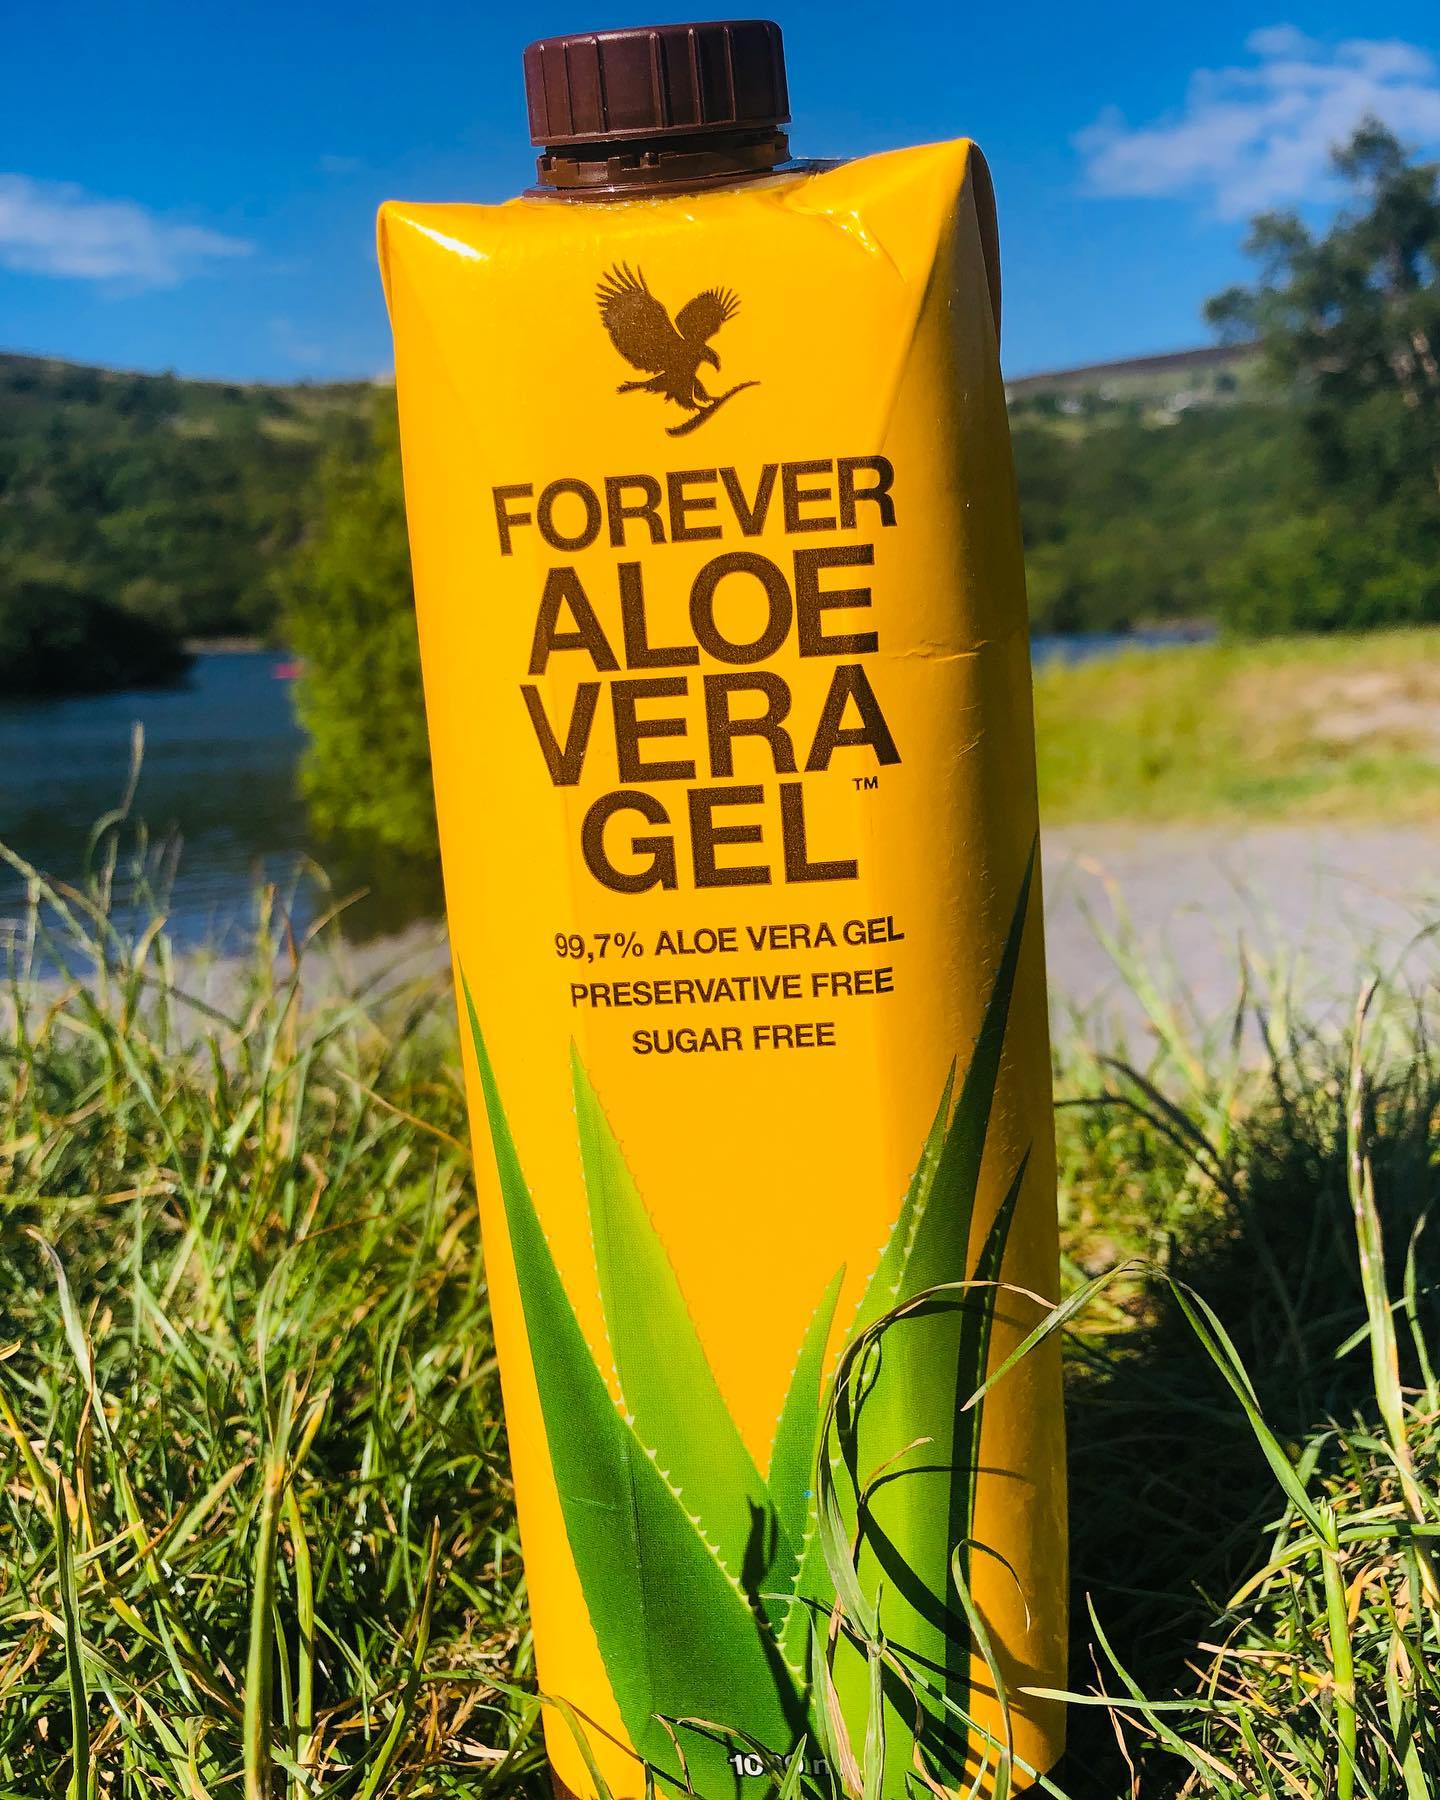 I drink Aloe Vera every day when I first wake up.  It is 99.7% Aloe Vera and is full of vitamins, minerals and nutrients that keep my skin glowing and my body healthy.  My shop link is in my bio or message me for more details.  #aloevera #aloeveragel #aloeveraskincare #healthybody #glowingskin